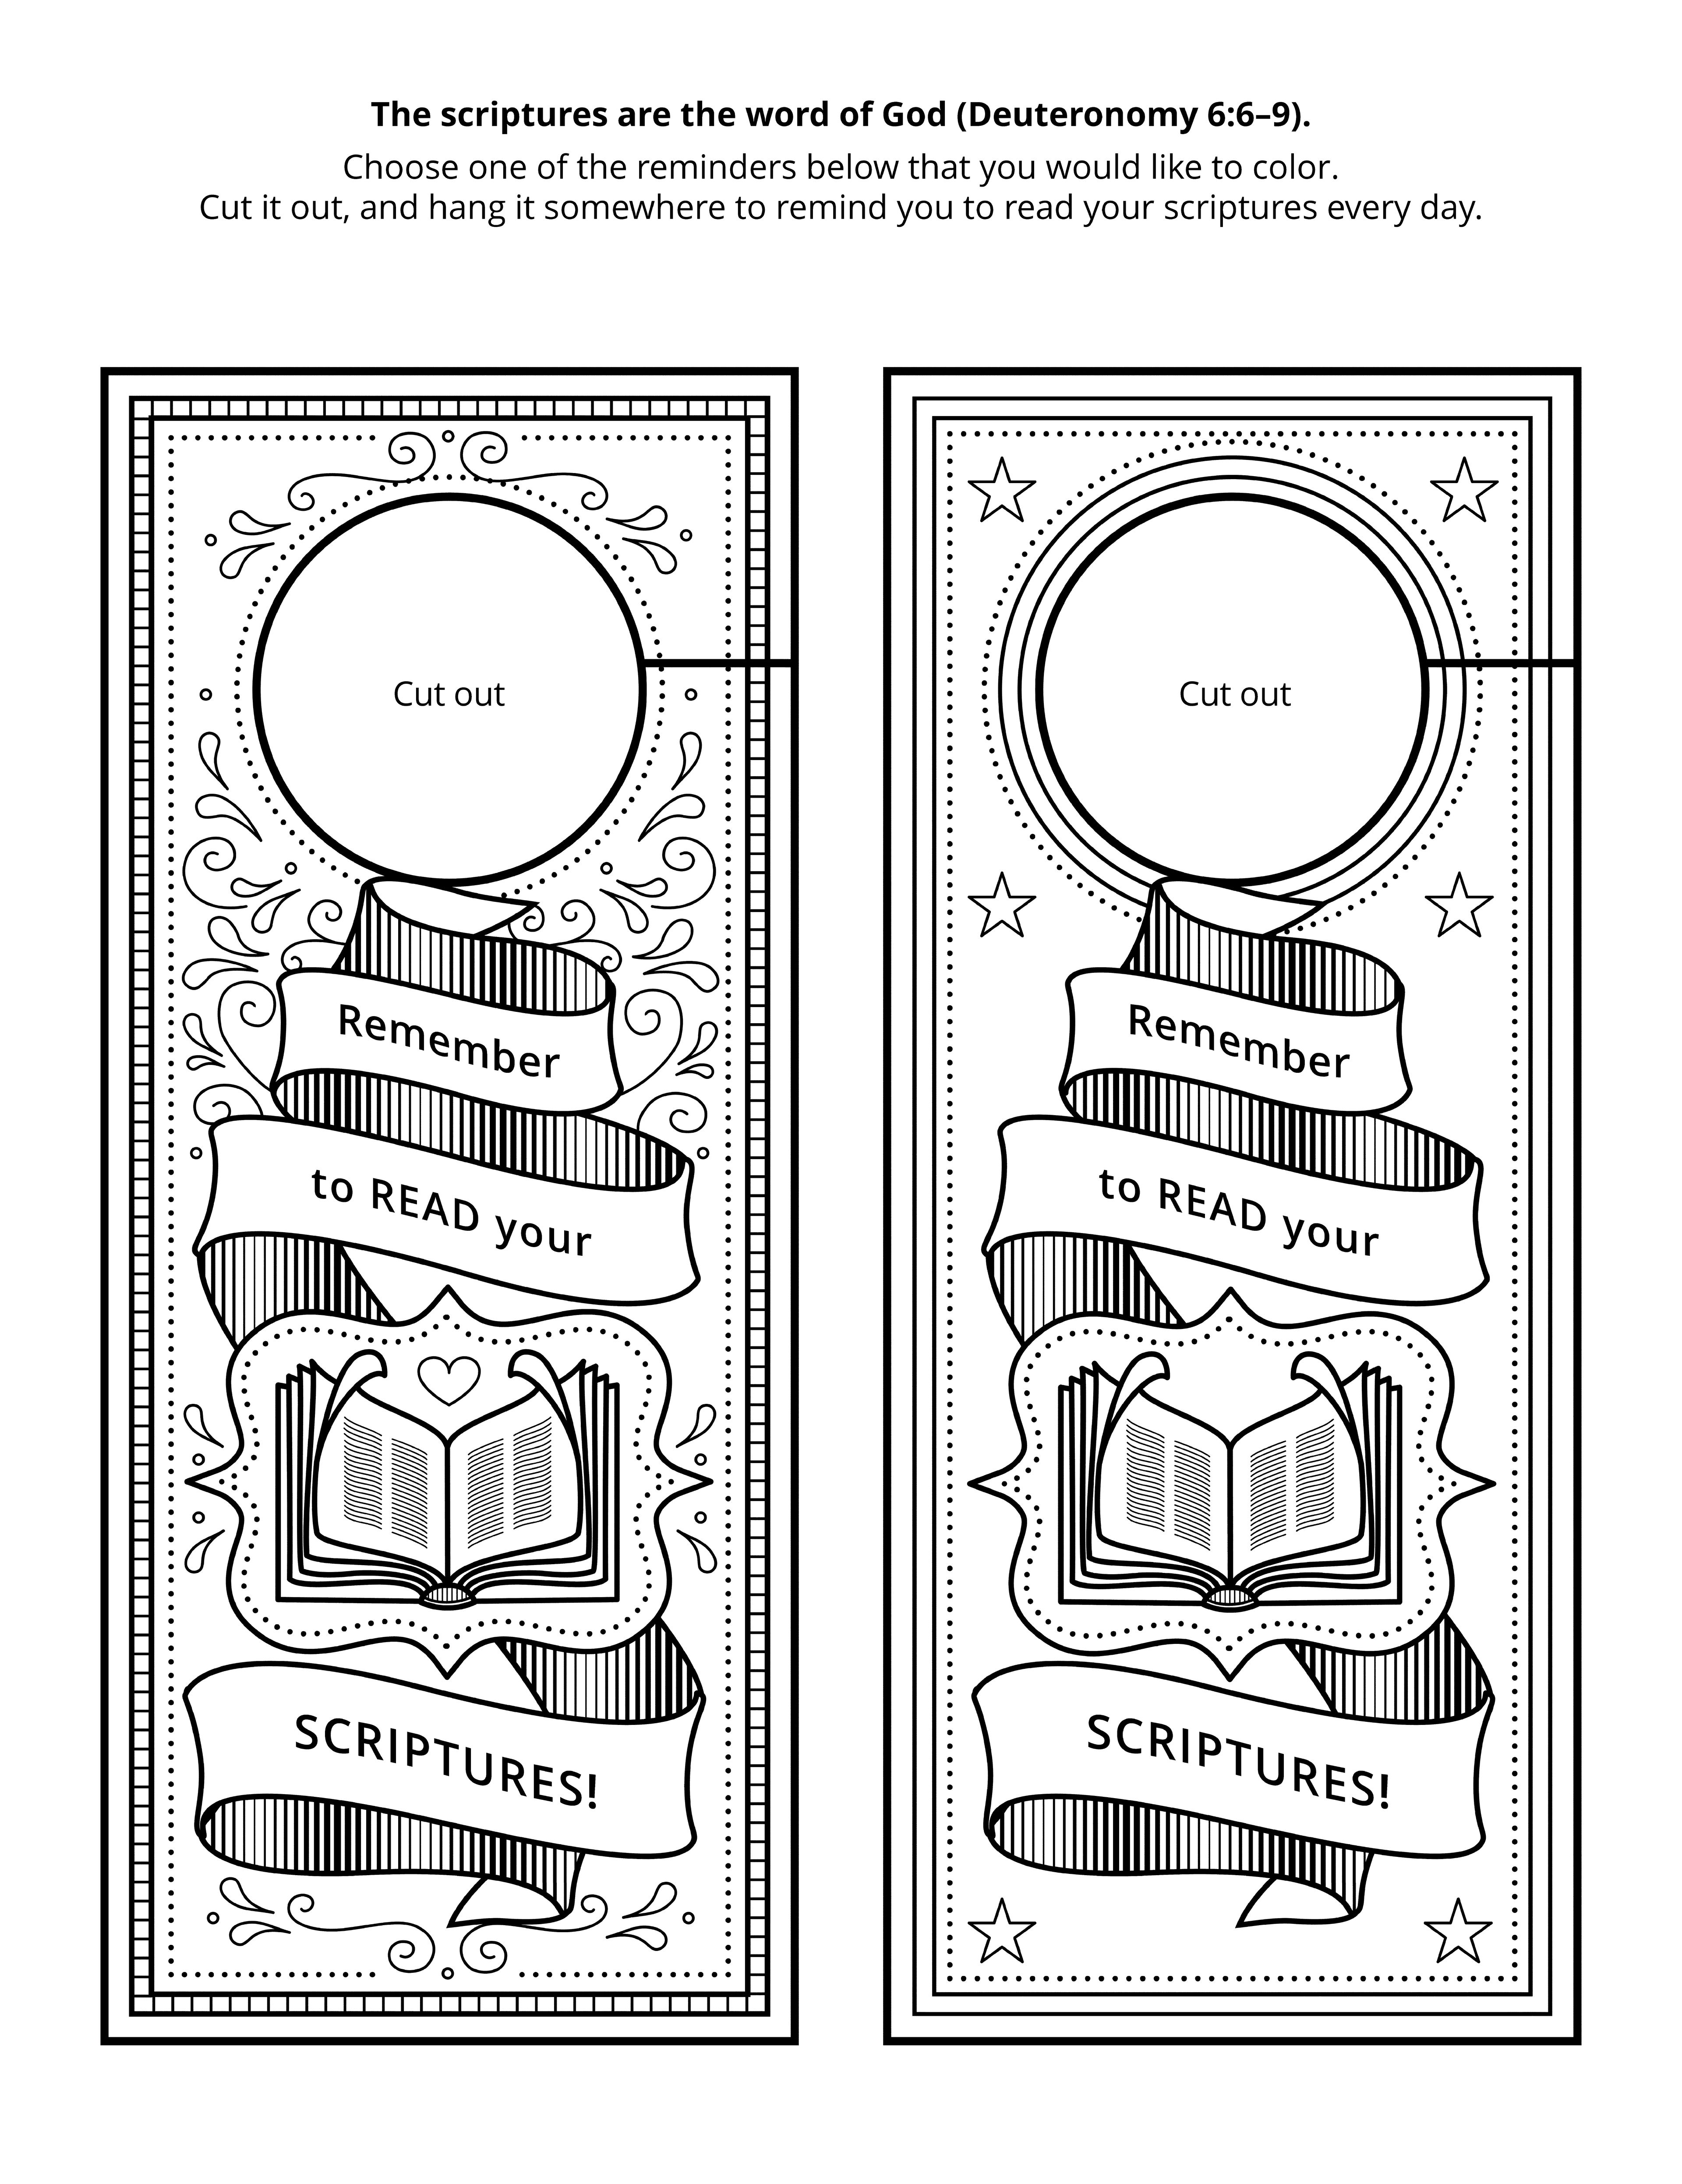 "The scriptures are the word of God" activity page.